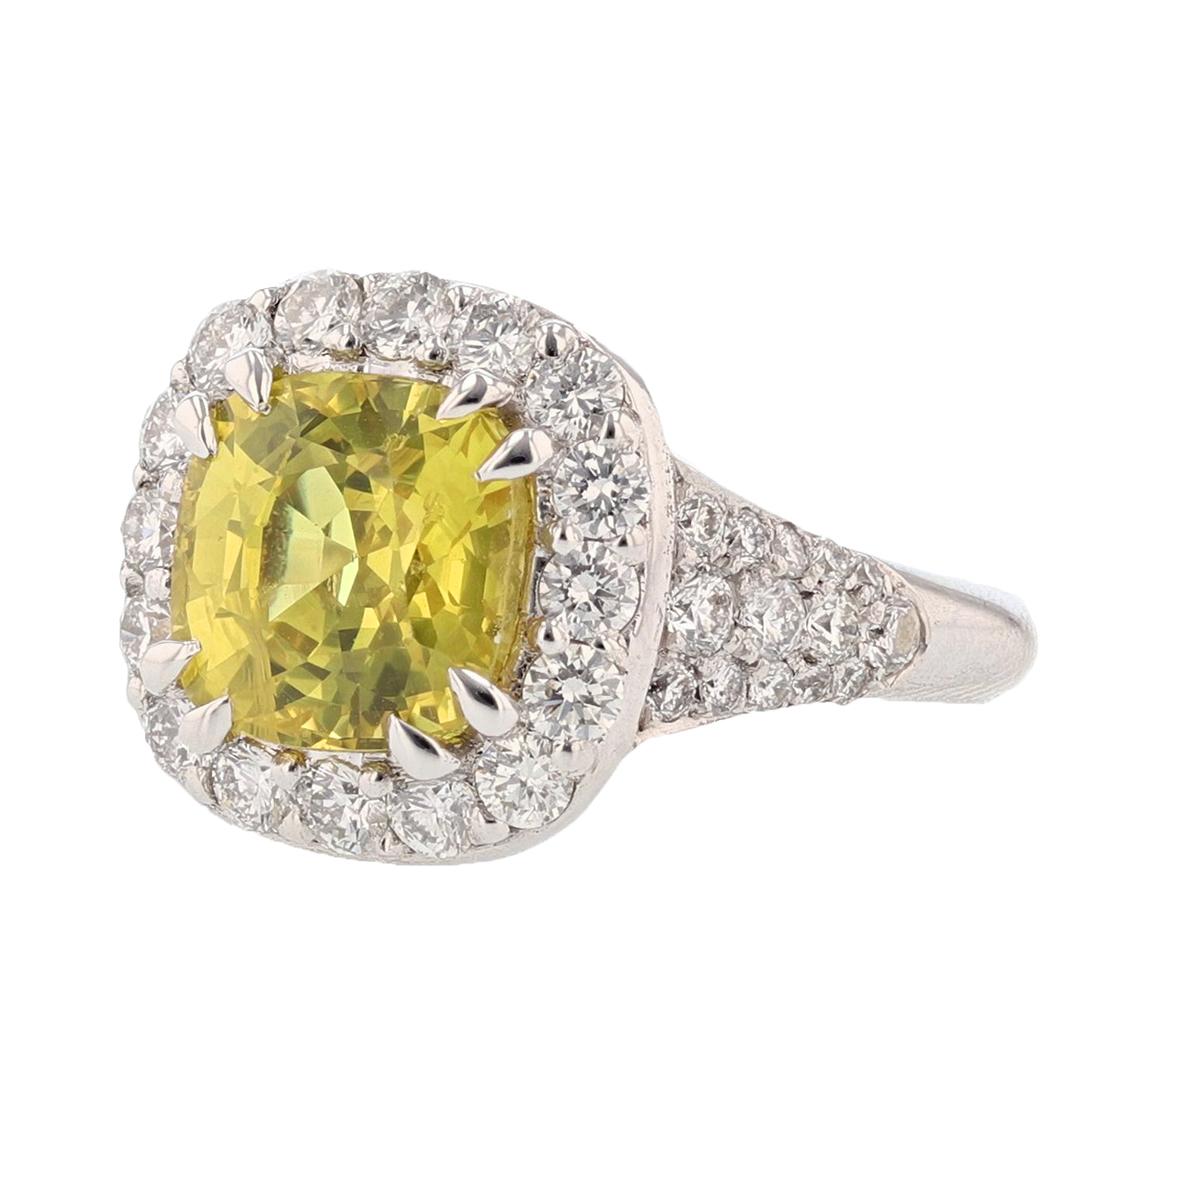 This ring is set in 14 karat white gold. The center stone is a Cushion cut Yellow Sapphire weighing 4.85 carats and is prong set. The Sapphire is AGL Certified (AGL-GB51157). The mounting features 44 round cut diamonds weighing 1.33cts.